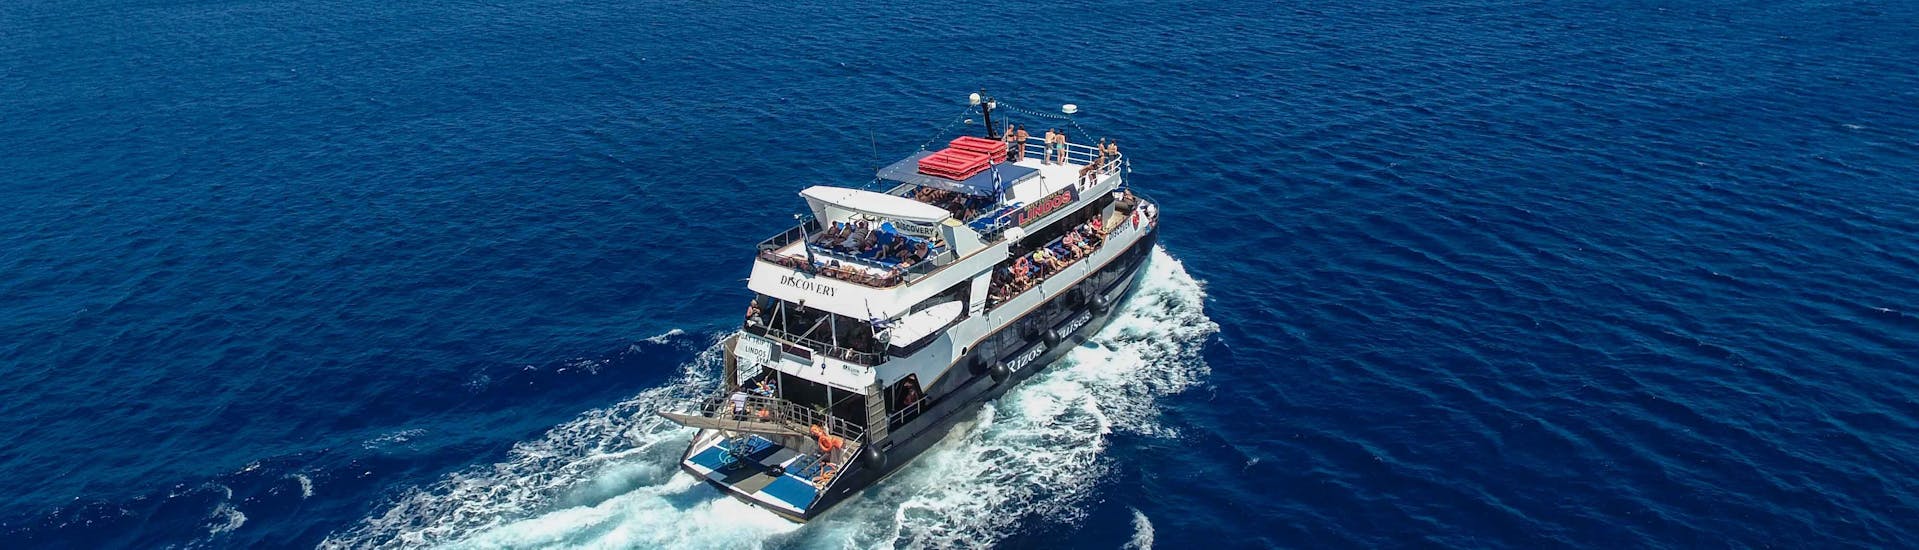 The boat "Discovery" navigates on the Mediterranean Sea during the Full-Day Boat Trip to Lindos with Swimming with Rizos Cruises Rhodes.